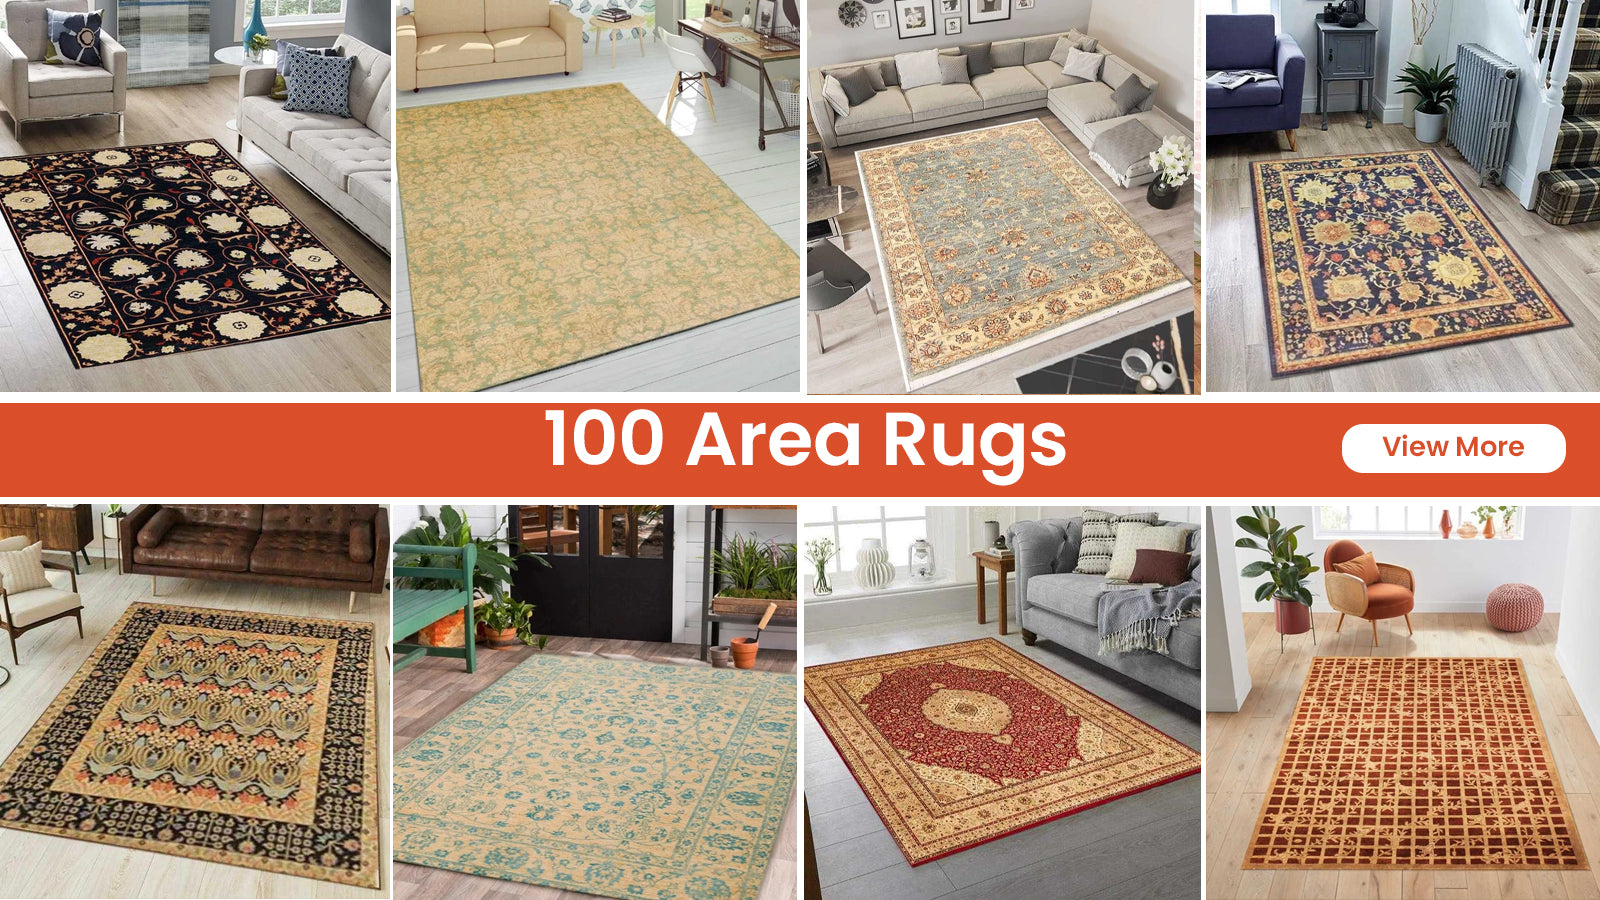 How to Decorate Open Floor Plan With Stunning Rugs - RugKnots